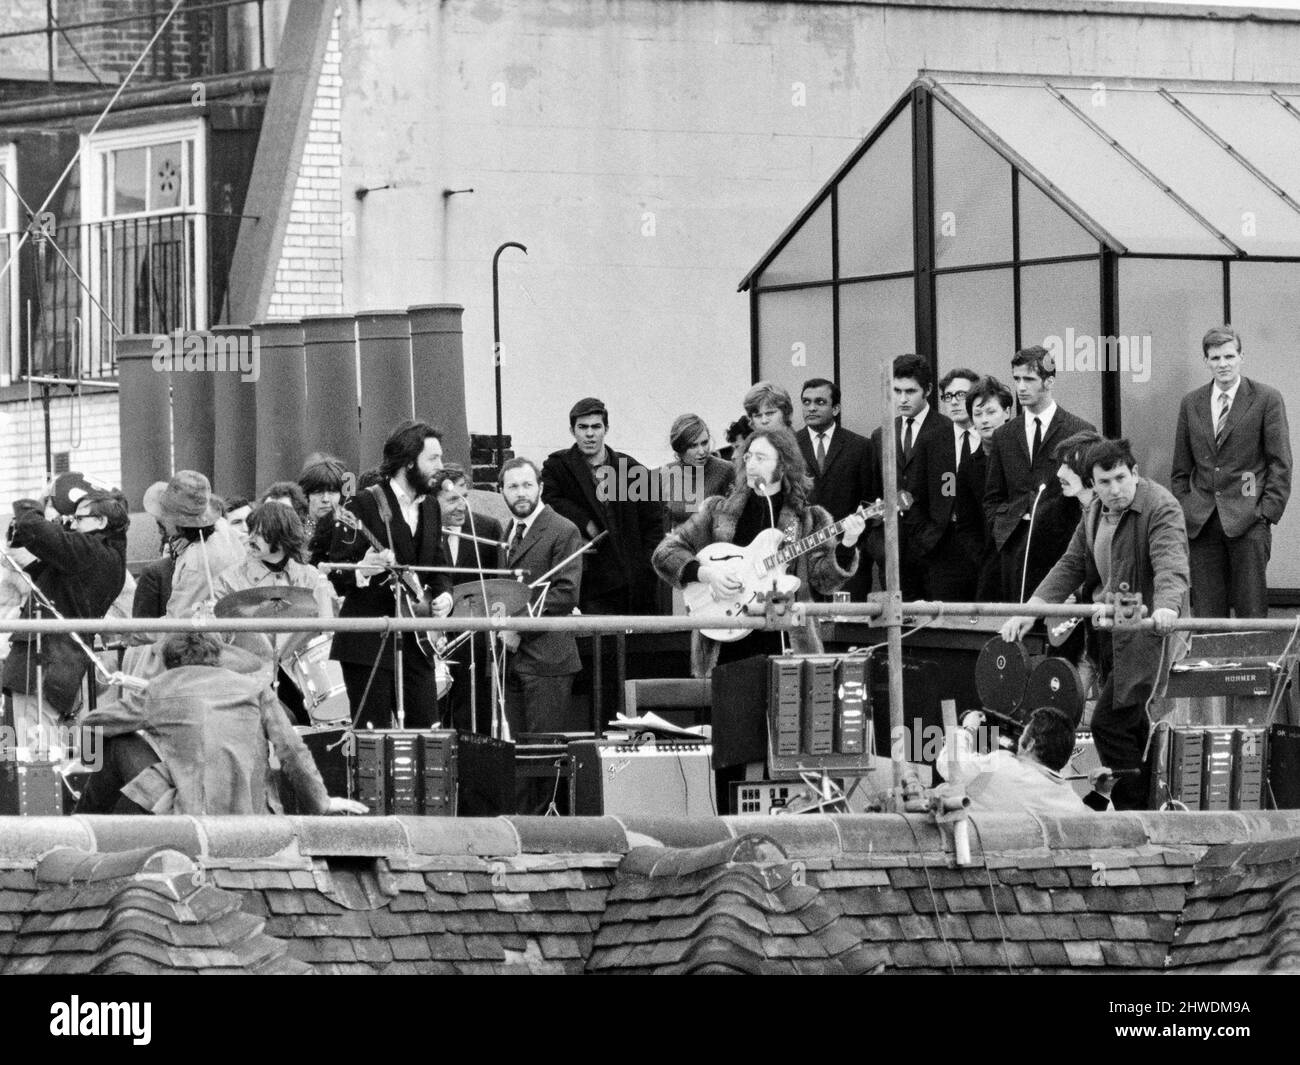 The Beatles perform a rooftop concert at Apple Headquarters, 3 Saville Row London on 30th January 1969. The performance was a part of filming for a documentary of the band rehearsing and recording the album Let It Be. The 42 minute session drew crowds to the street & adjoining rooftops. This was the band's final live performance before breaking up in April 1970. Performing on the roftop left to right: Ringo Starr, Paul McCartney, John Lennon and George Harrison. Stock Photo